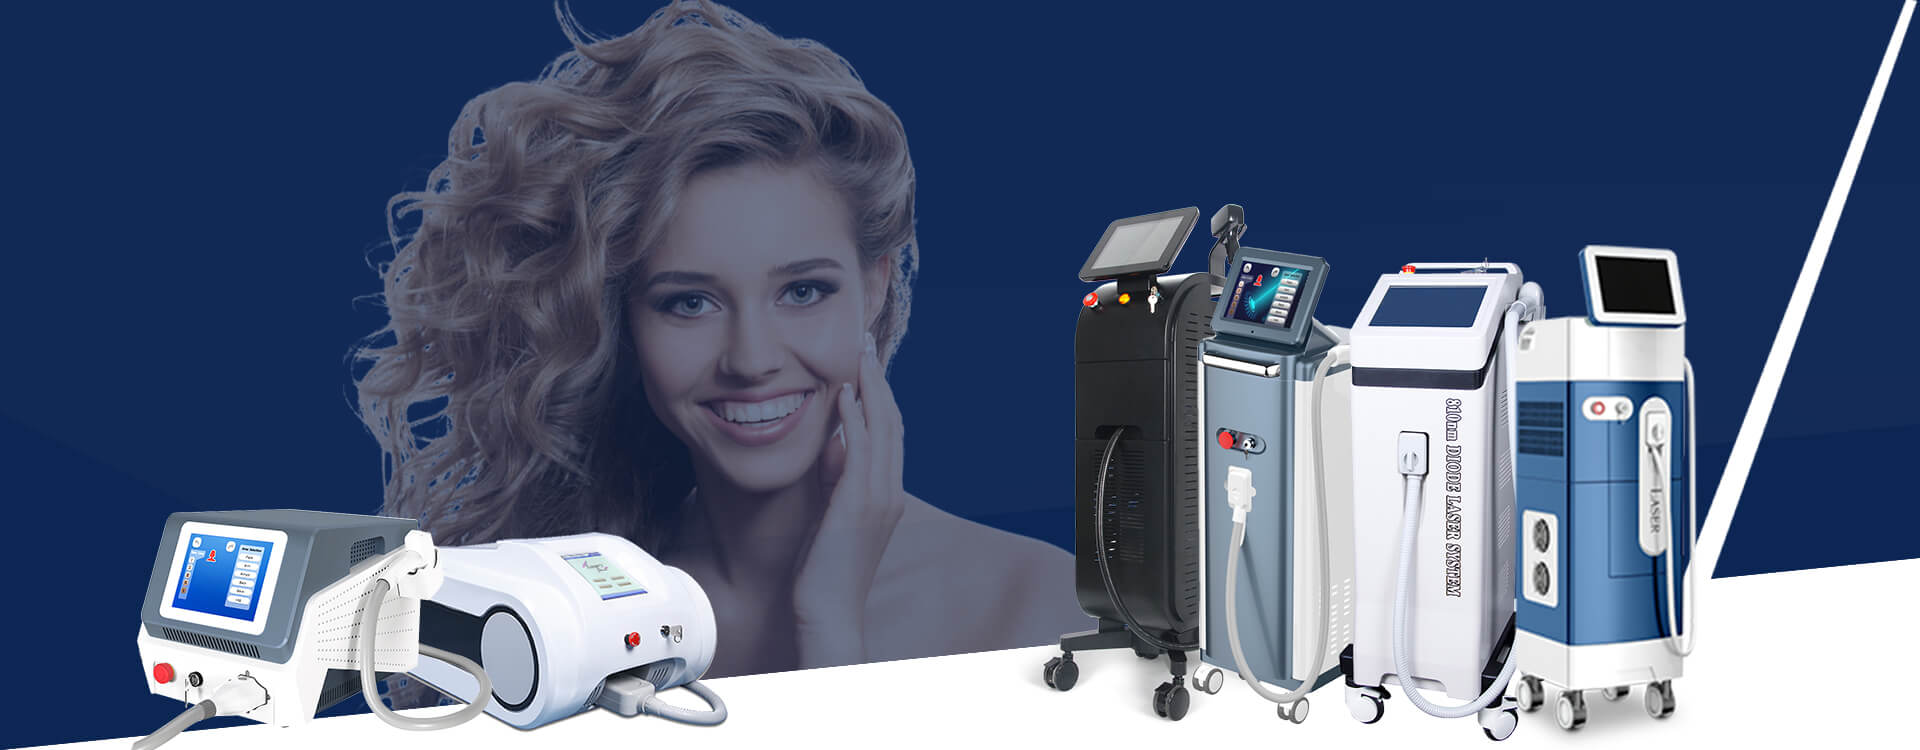 Laser Hair Removal Machine  Cynosure Apogee Elite Buy Laser Hair Removal  Machine